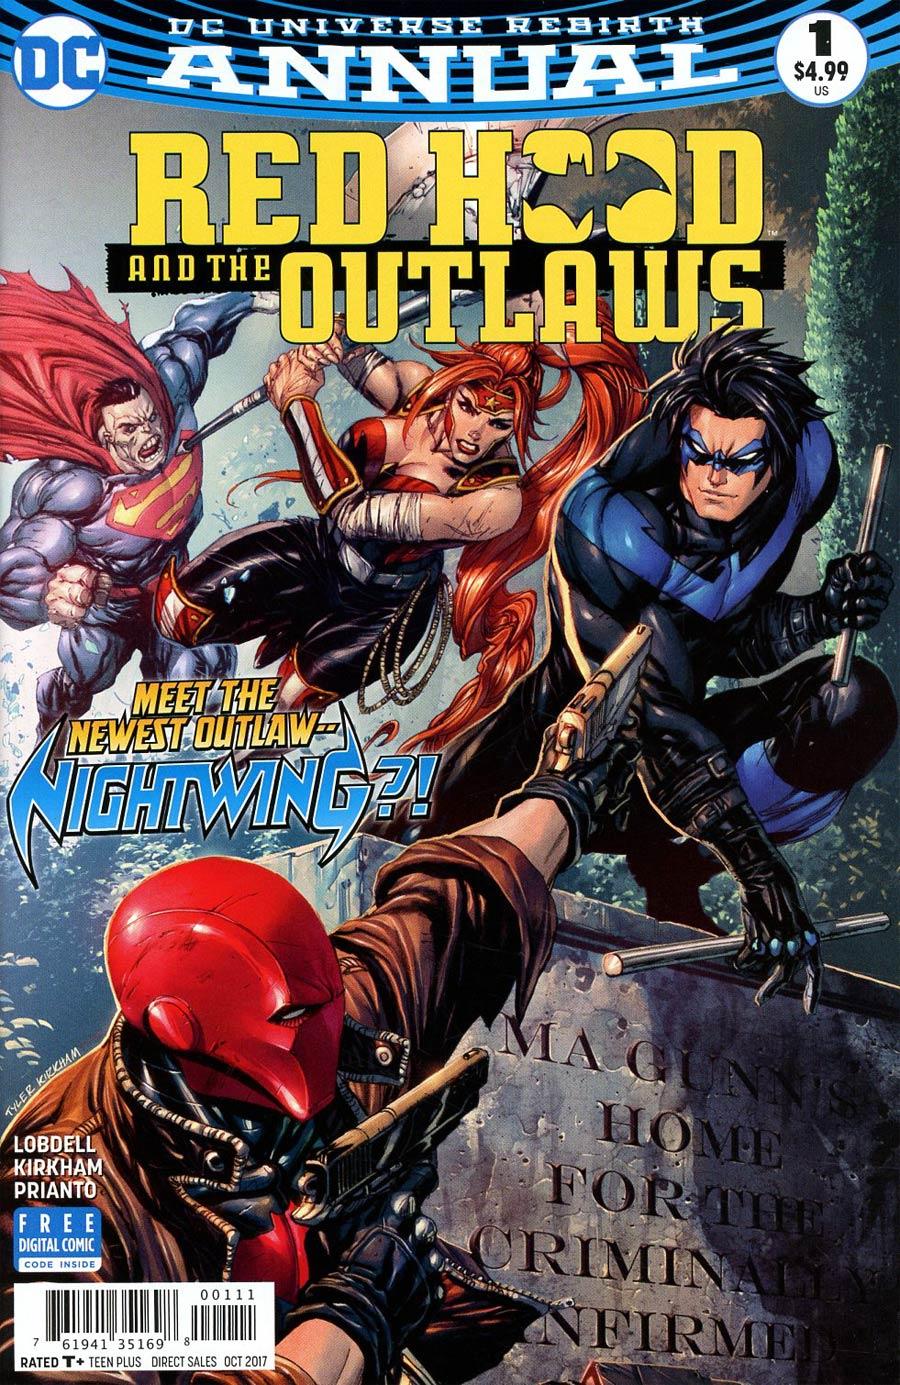 Red Hood and the Outlaws Vol. 2 Annual #1